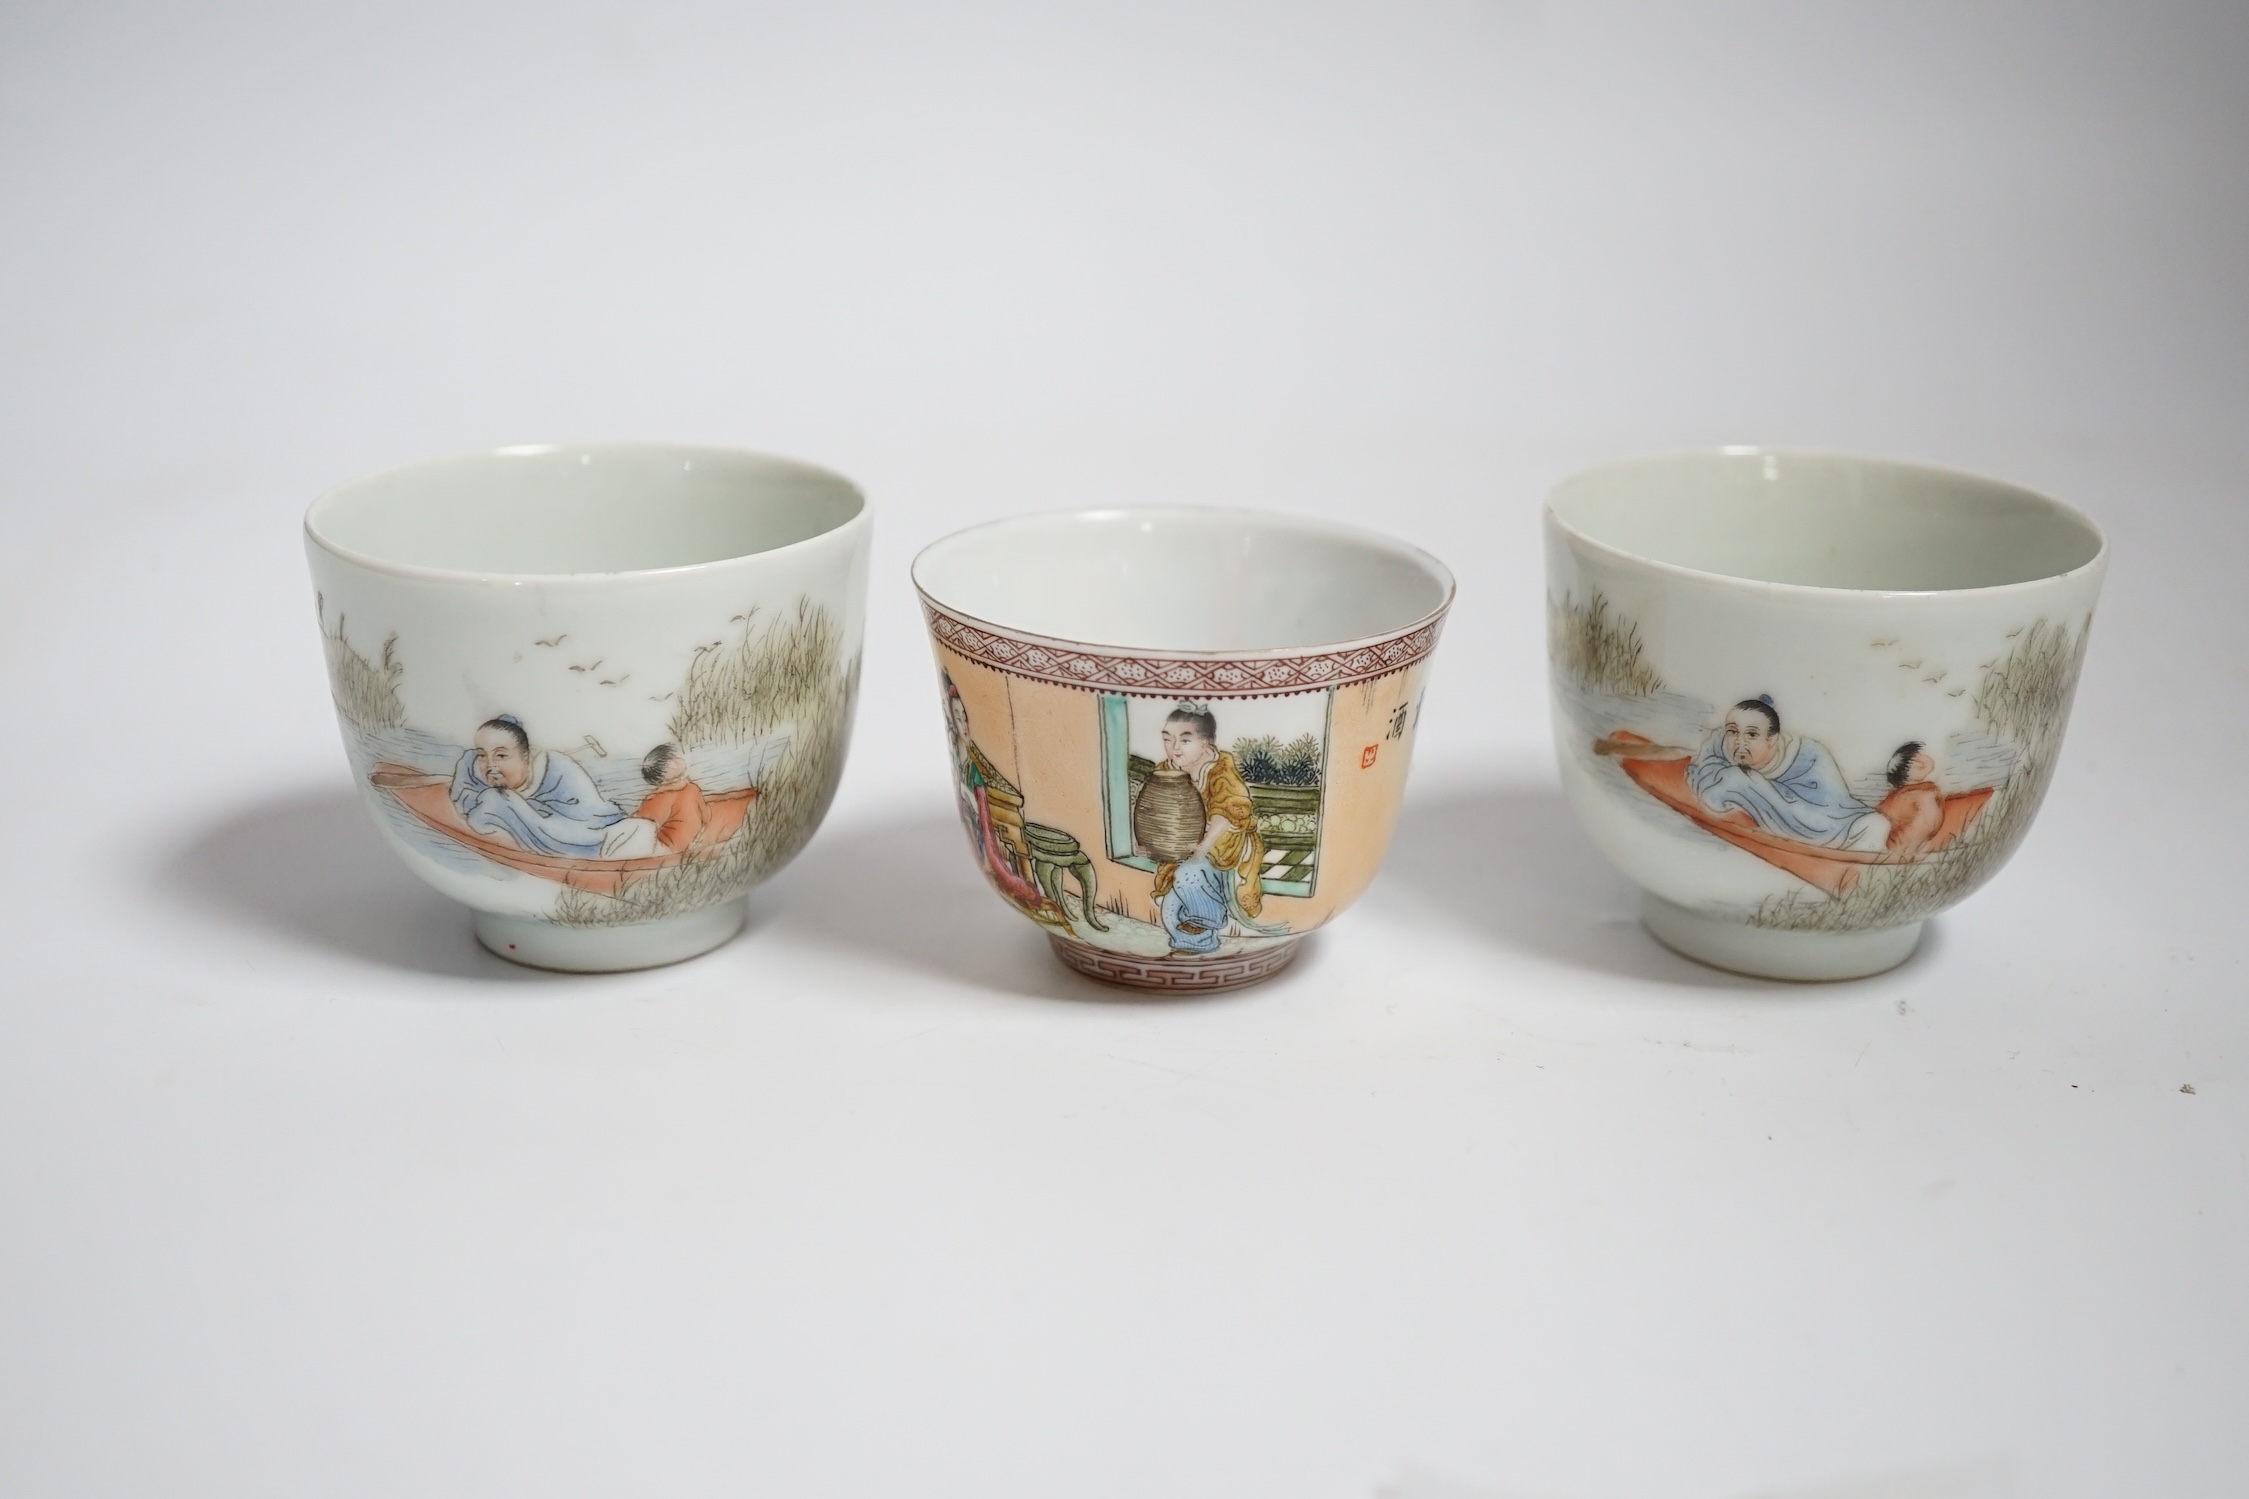 Three Chinese enamelled porcelain tea bowls, largest 5cm high - Image 2 of 5